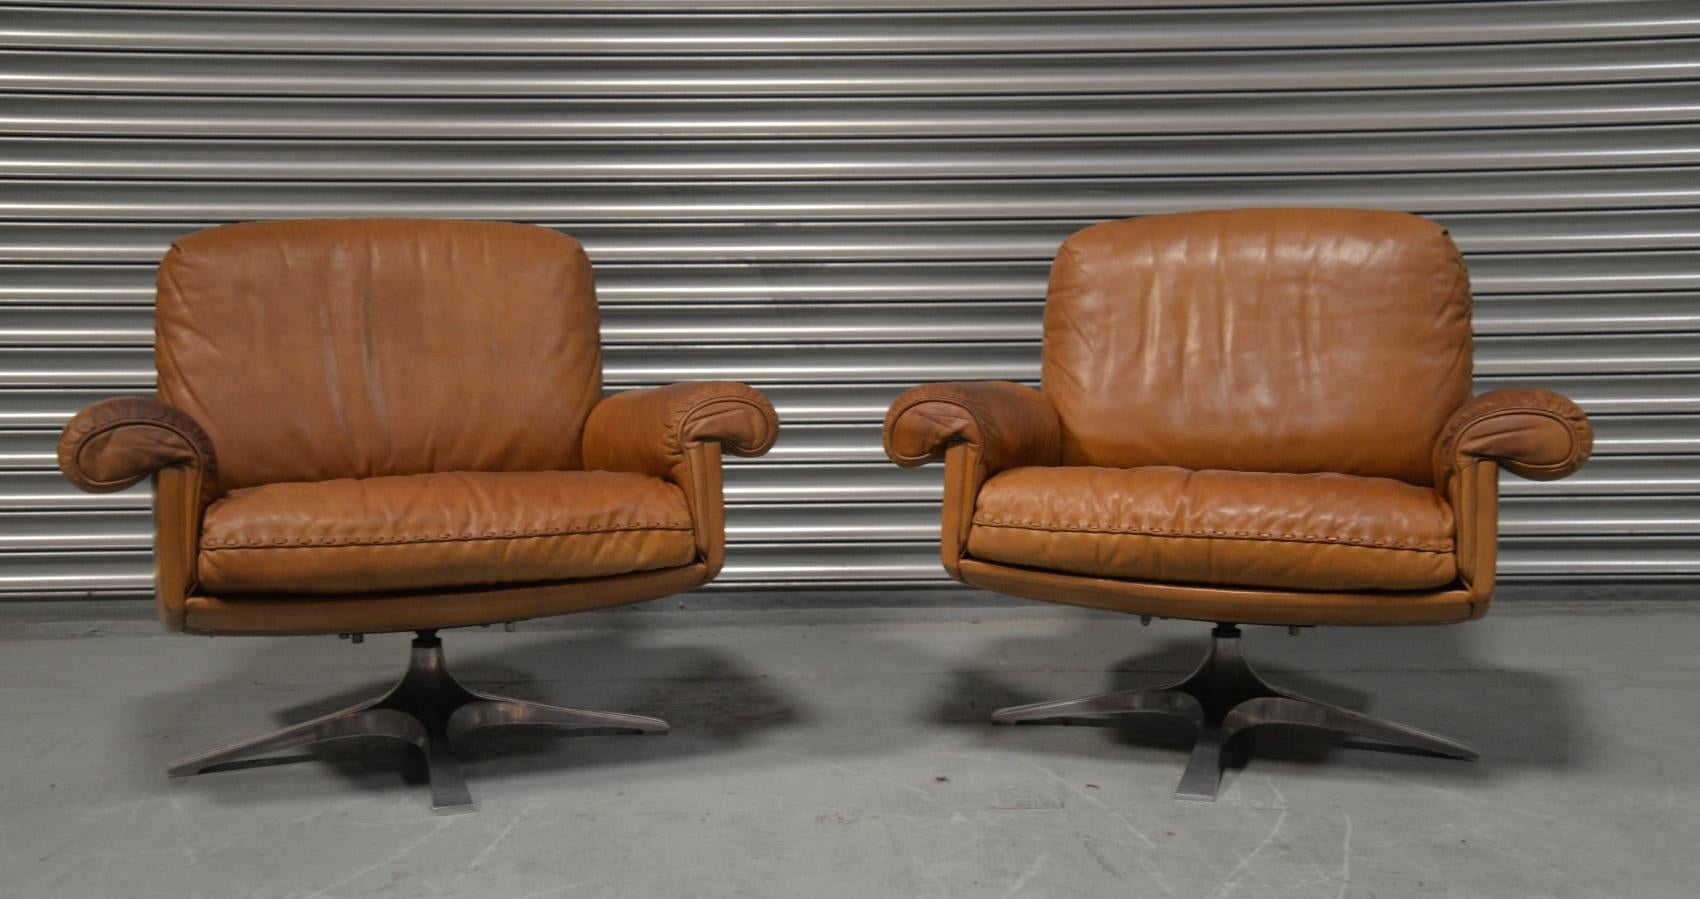 Discounted airfreight for our US Continent and International customers ( from 2 weeks door to door)

We are delighted to bring to you a pair of rarely available and highly desirable vintage 1970s De Sede DS 31 swivel lounge armchairs in beautiful